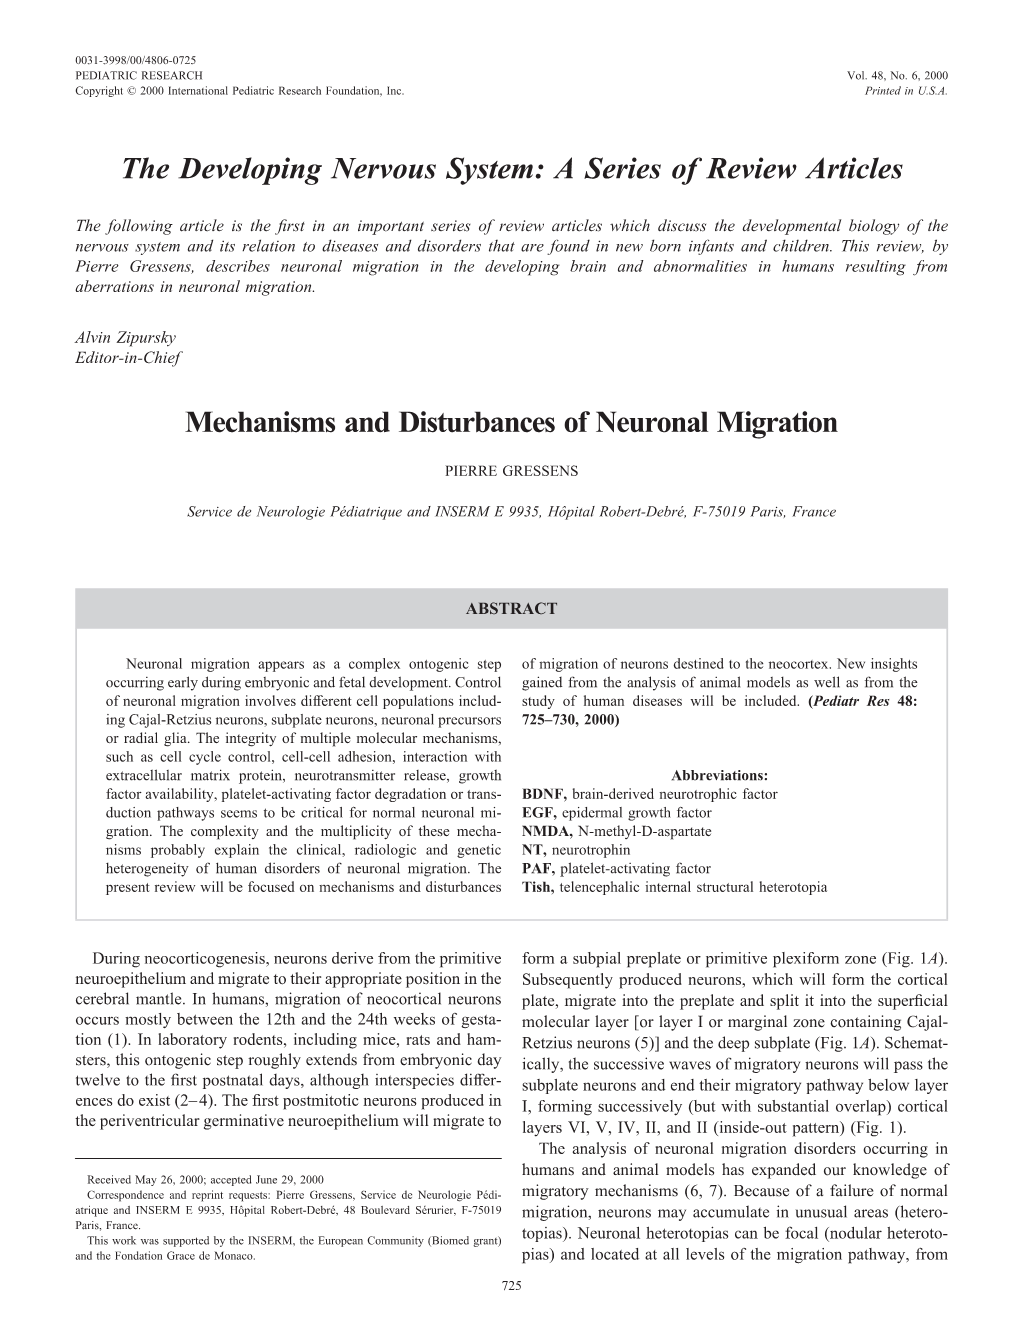 Mechanisms and Disturbances of Neuronal Migration the Developing Nervous System: a Series of Review Articles